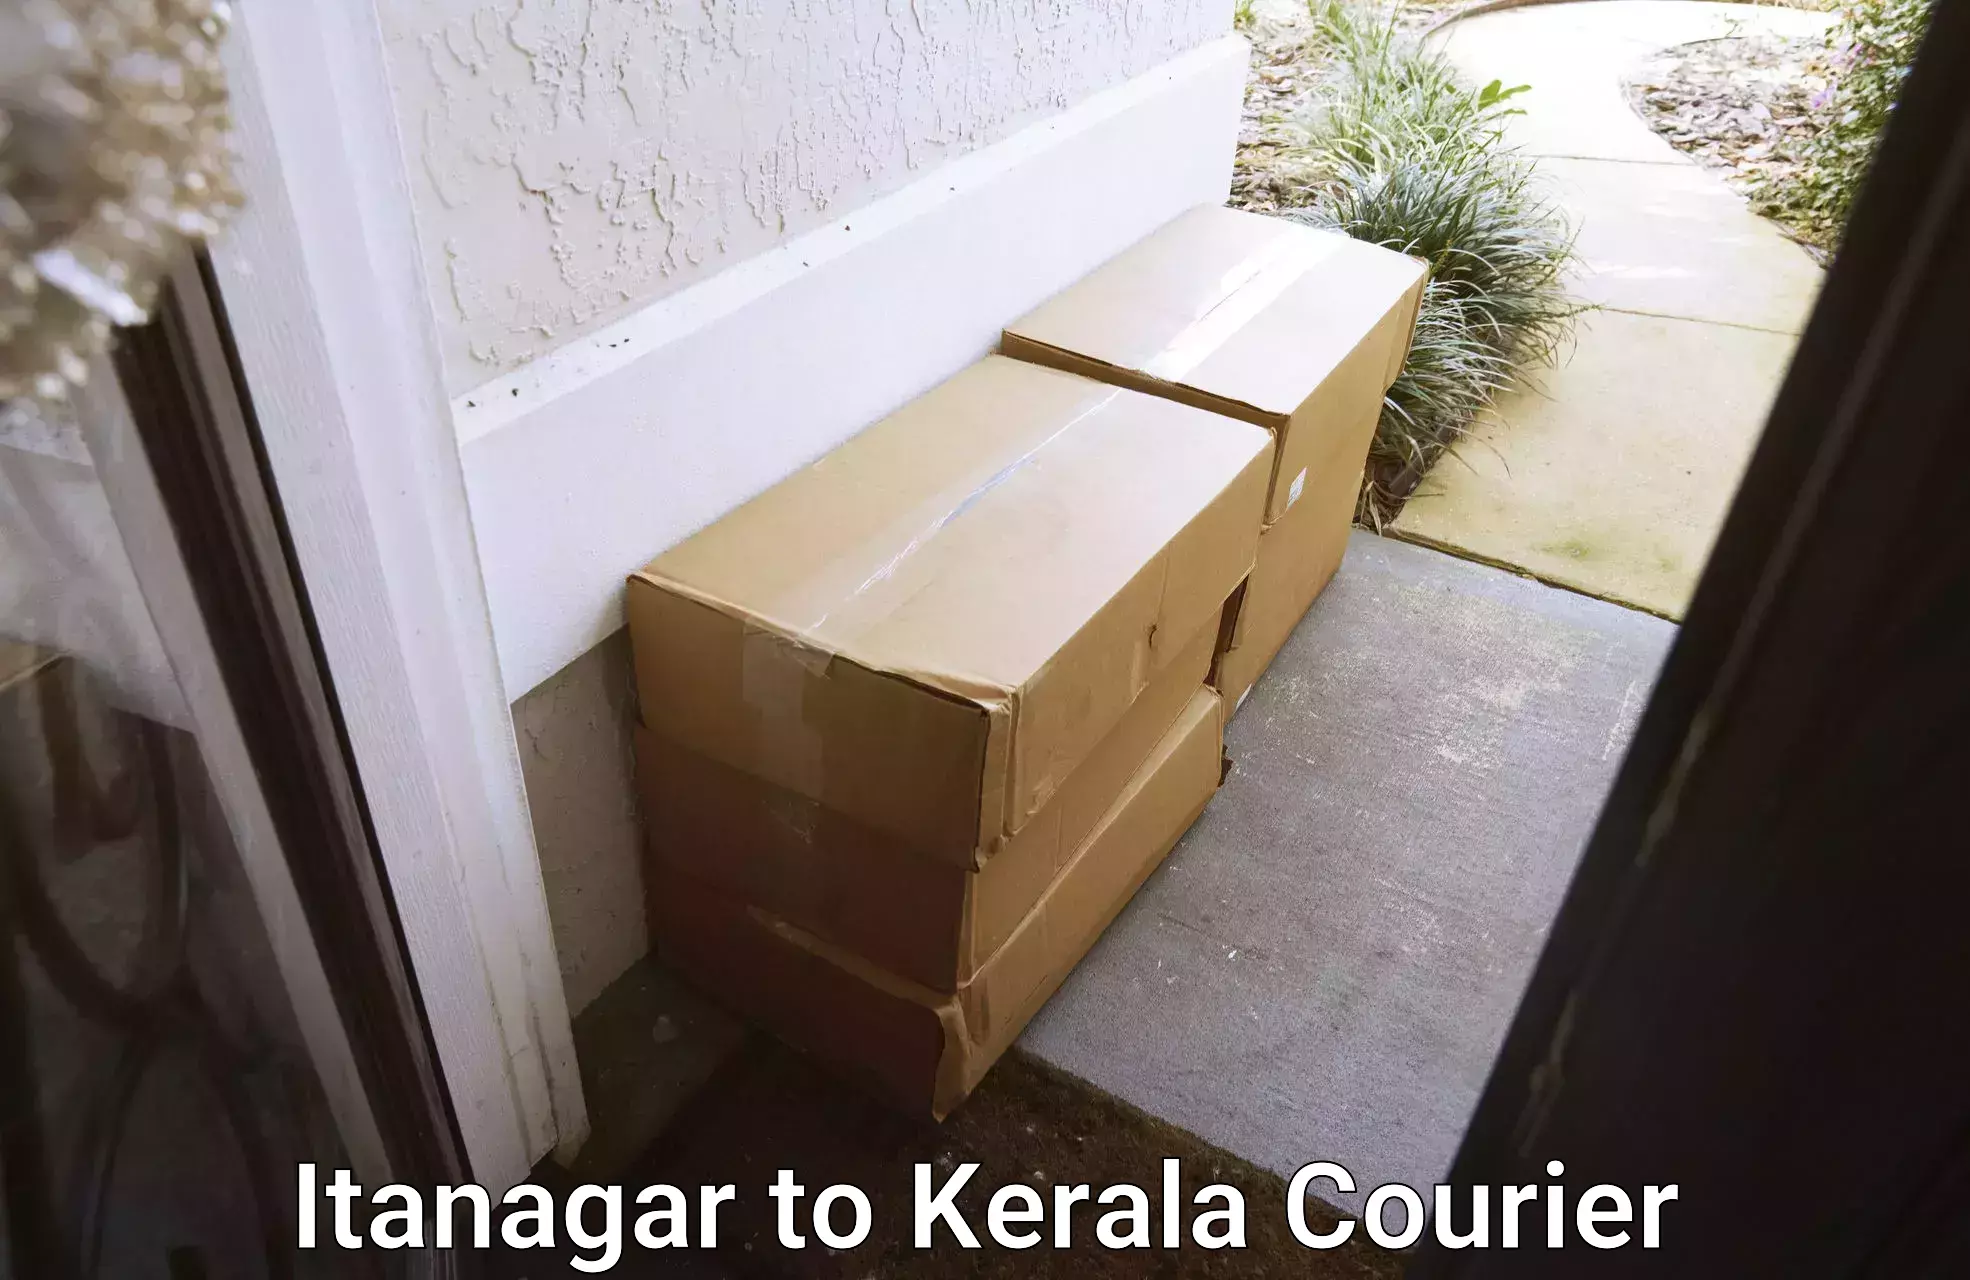 Parcel service for businesses Itanagar to Kerala